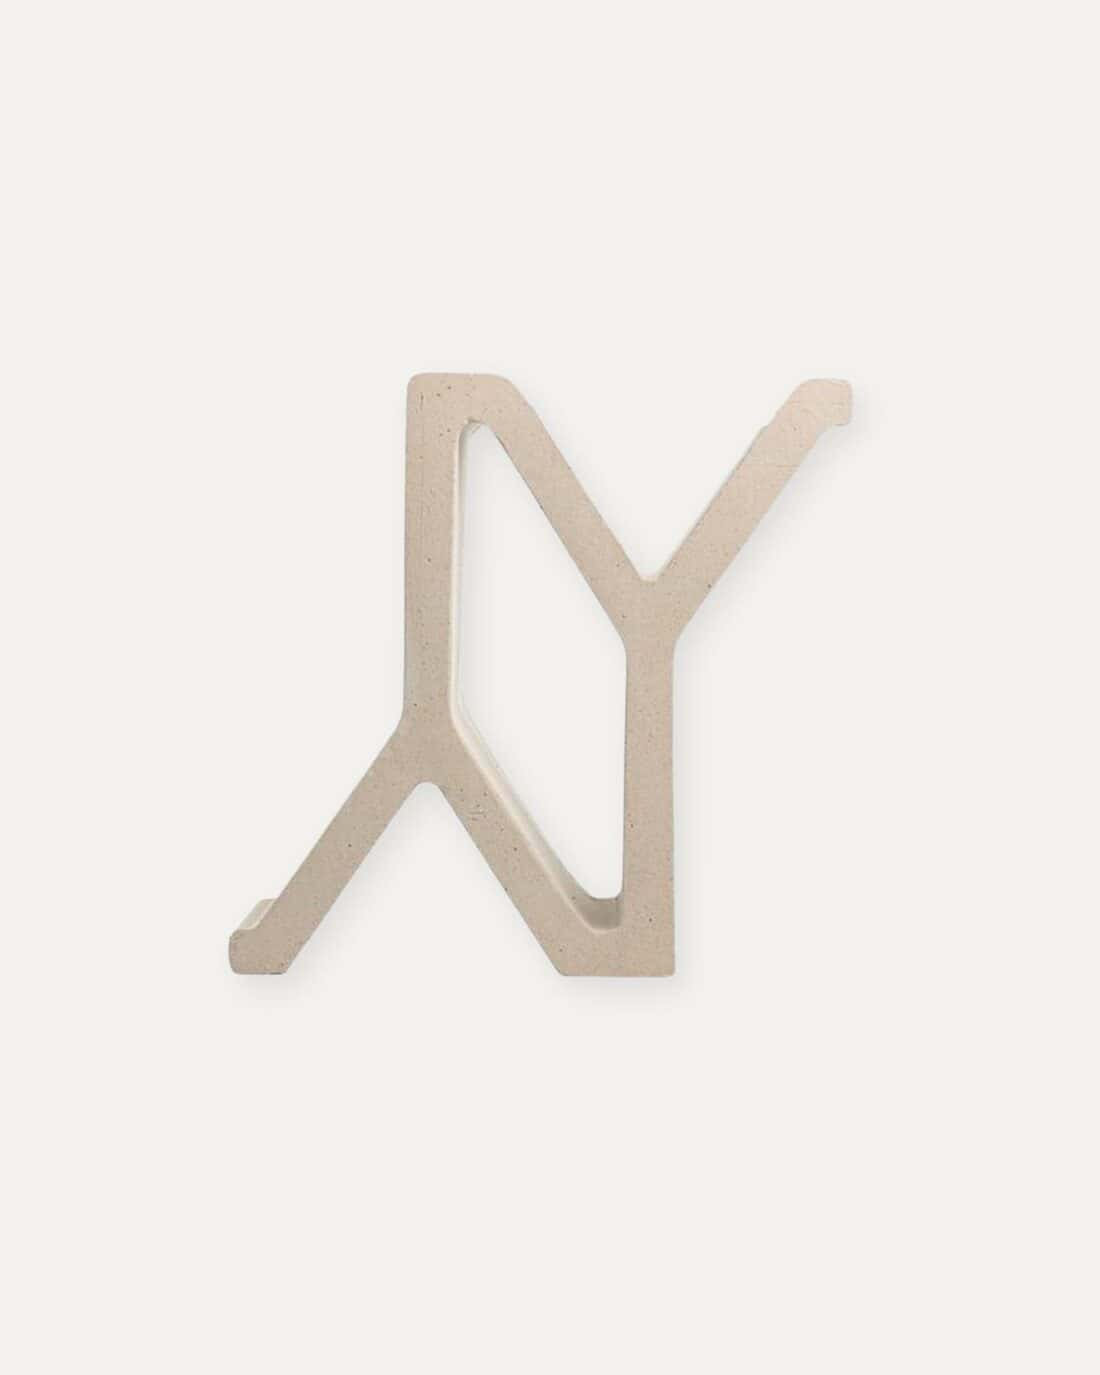 A metal letter y hanging on a white background.  Breeze block by arthur casas.